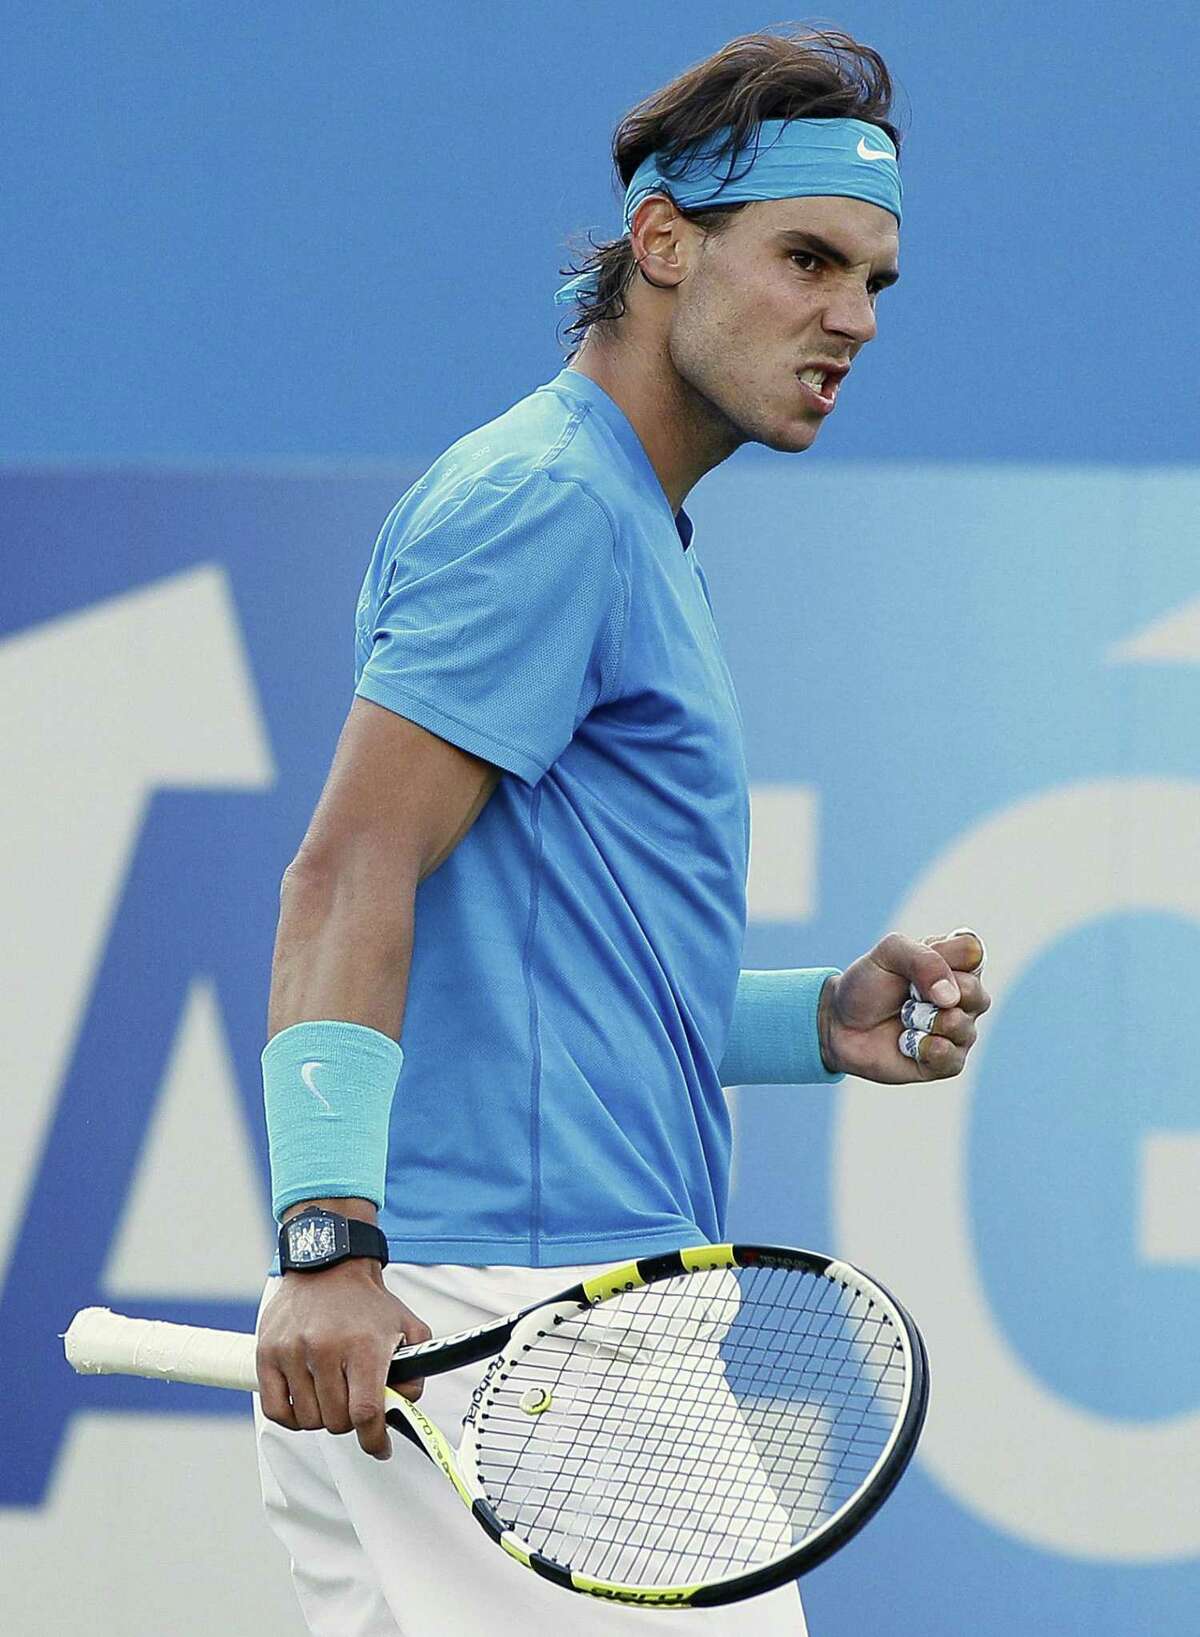 Rafael Nadal of Spain reacts after playing a return to Radek Stepanek of Czech Republic during their singles tennis match at the Queen's Grass Court Championship in London, Thursday, June 9, 2011. (AP Photo/Kirsty Wigglesworth)